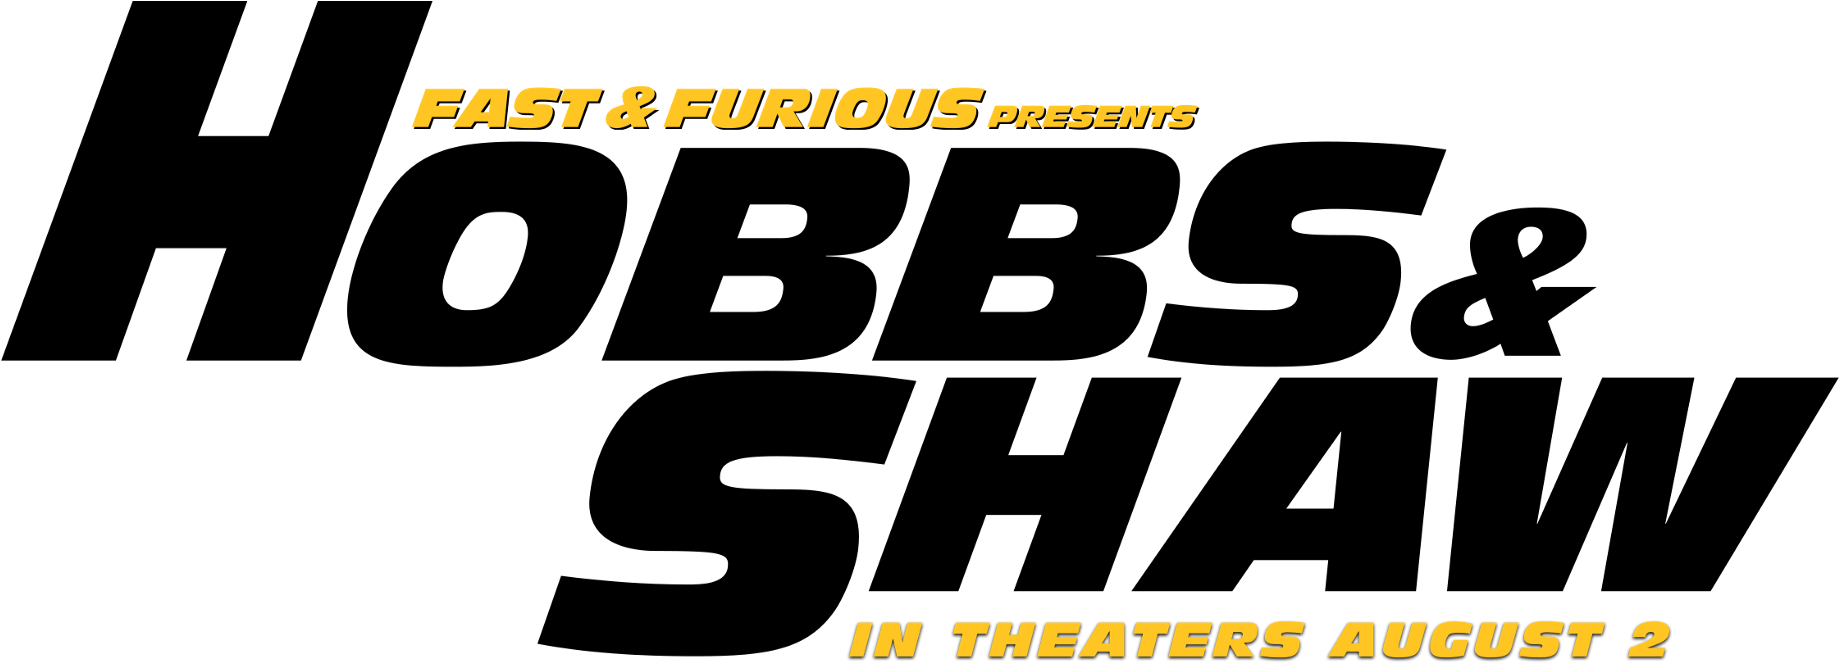 Fastand Furious Hobbsand Shaw Movie Title